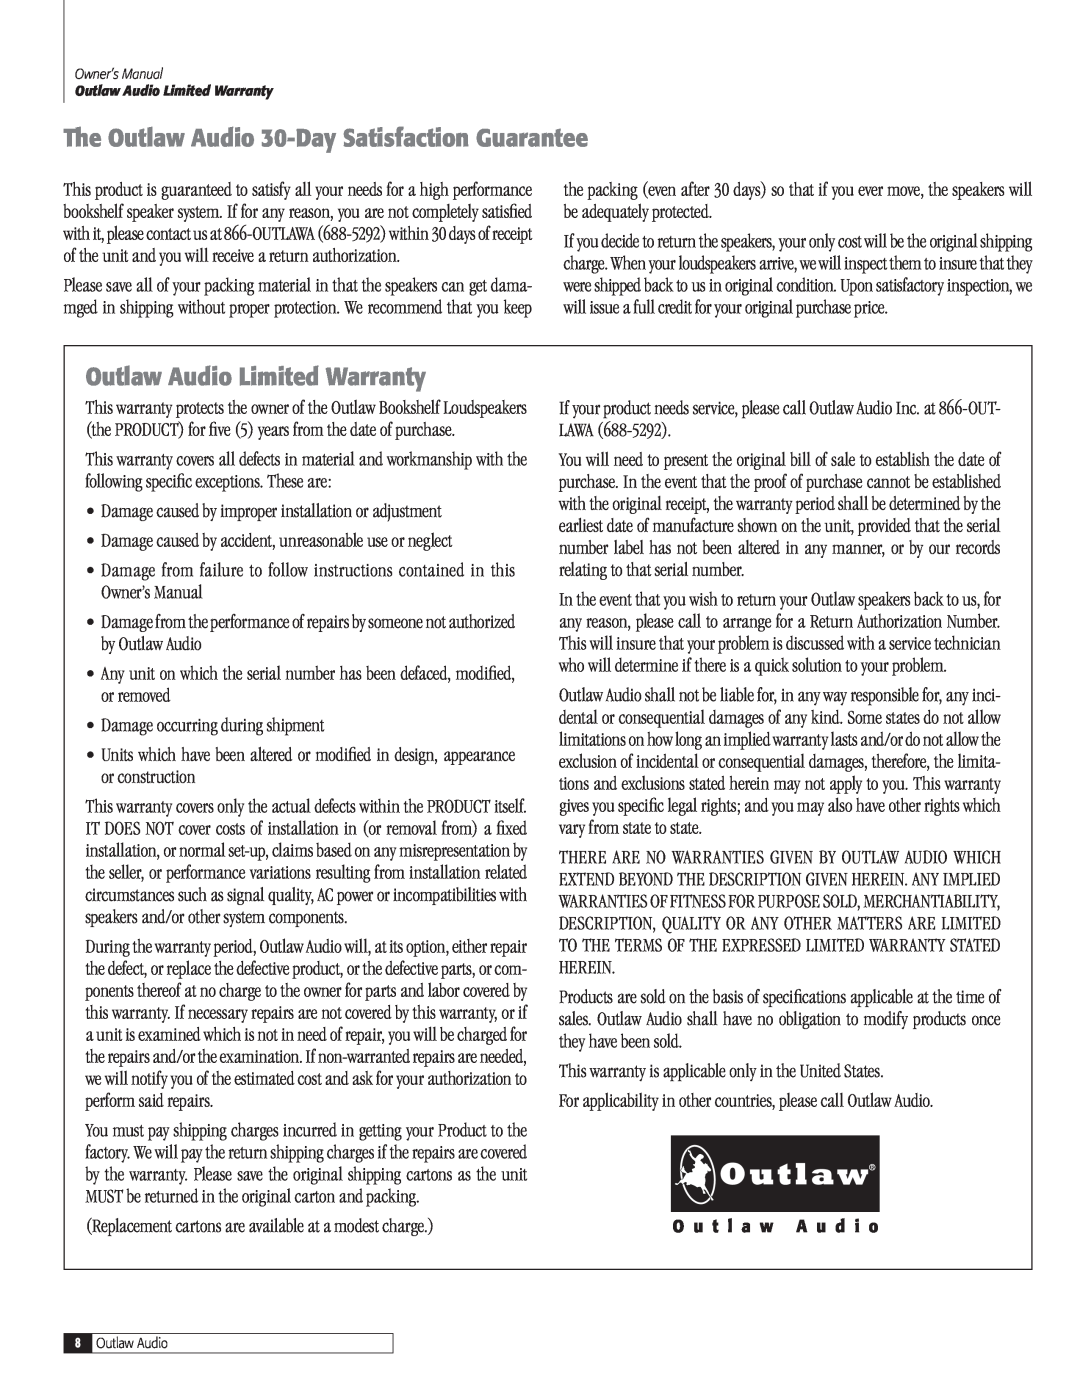 Outlaw Audio BLS-B(C) owner manual The Outlaw Audio 30-Day Satisfaction Guarantee, Outlaw Audio Limited Warranty 